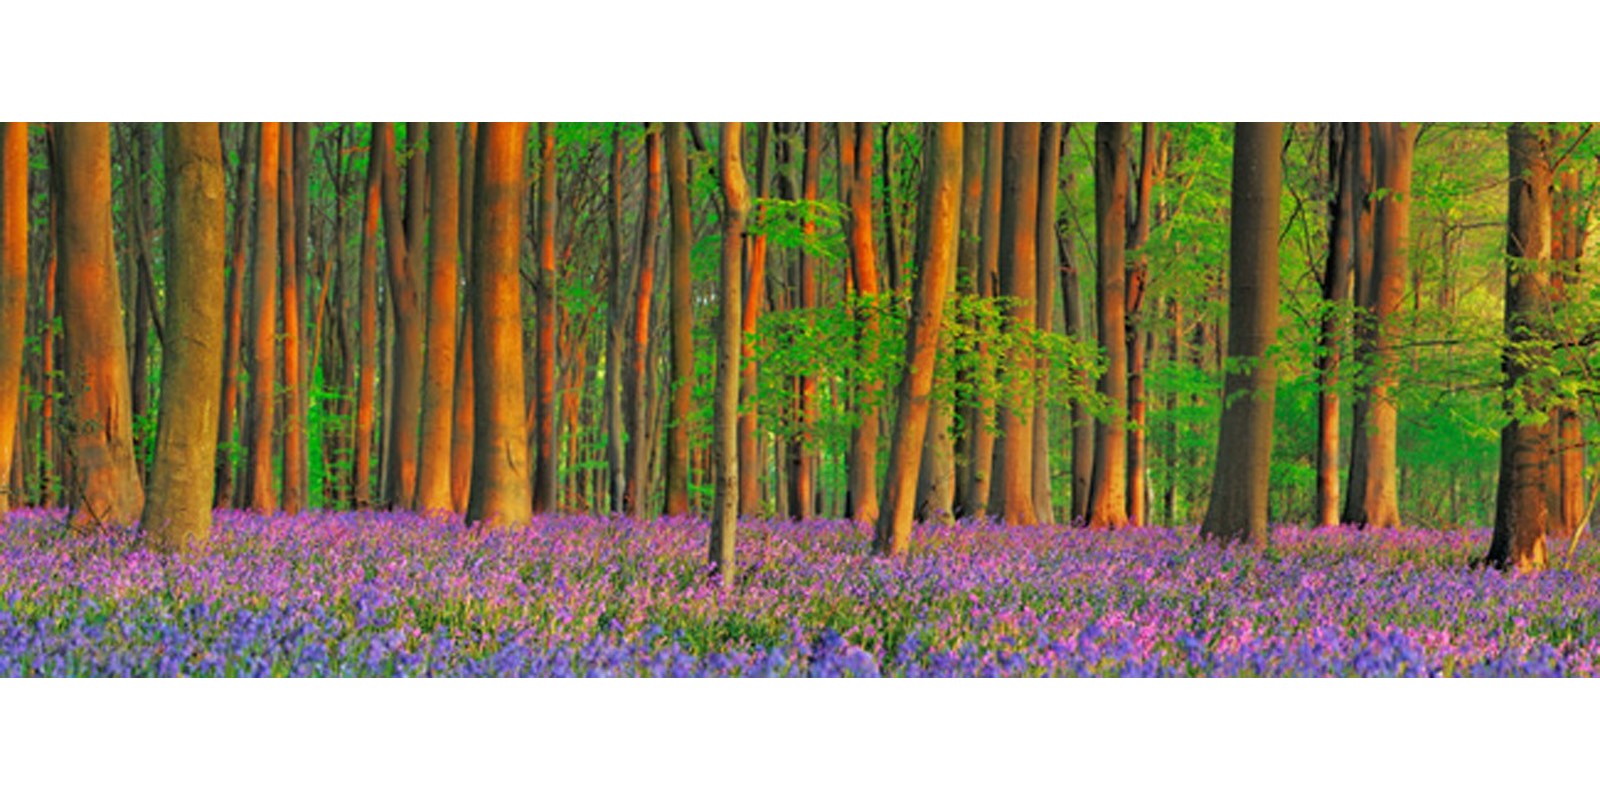 Frank Krahmer - Beech forest with bluebells, Hampshire, England